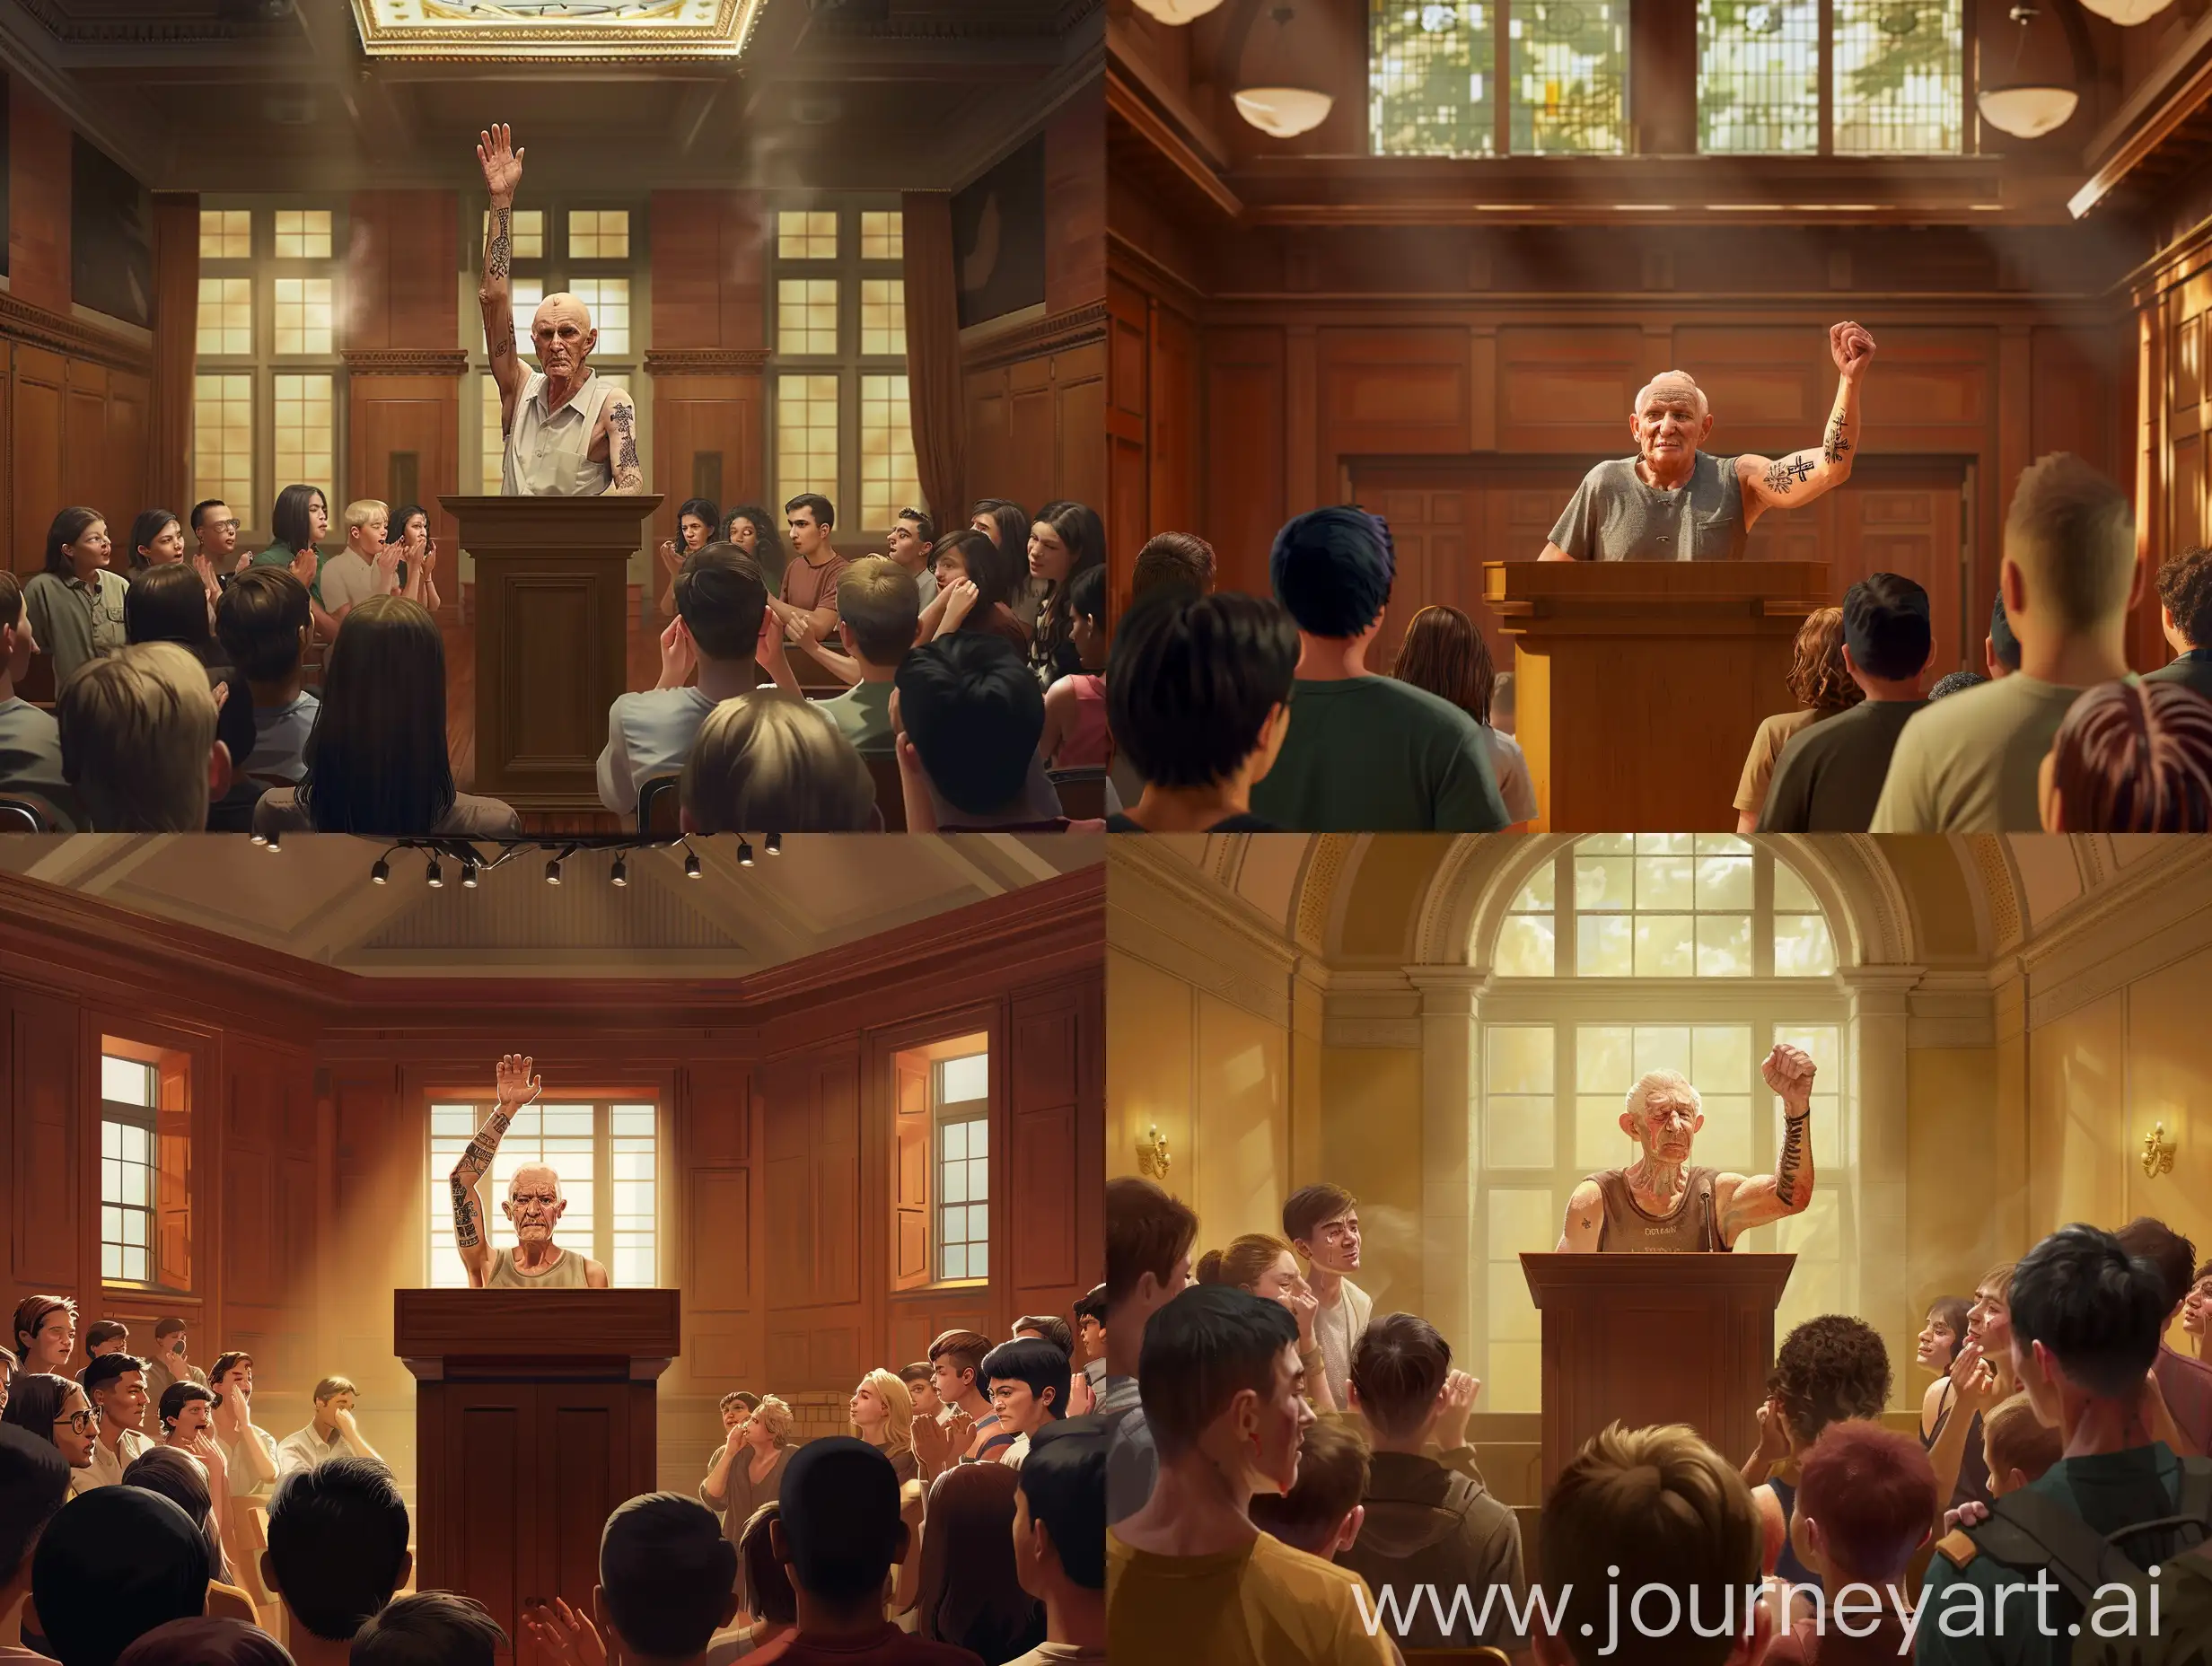  image set in a warmly lit, spacious lecture hall, reminiscent of those found in prestigious universities like Harvard. The room is filled with attentive students, dressed in casual and semi-formal attire, symbolizing the post ww2 era demographic and fashion of a student body. In the center, a dignified elderly man stands at the podium. His posture is one of quiet strength, with his bare arm rolled up sleeve raised to the sky with his Holocaust tattoo visible for display and his face, marked by the passage of time, reflects a depth of experience. He is depicted with a gentle expression, indicating he is sharing a profound and moving story.

The students’ faces are turned towards him, expressions ranging from deep sadness crying to openly crying, illustrating the profound impact of his words. Some students are subtly wiping tears from their eyes, capturing the emotional gravity of the moment. Others are softly clapping while crying, a gesture of respect and acknowledgment for the survivor’s courage in sharing his story. The ambiance of the room is one of solemnity mixed with admiration, highlighting the educational and emotional significance of the encounter.